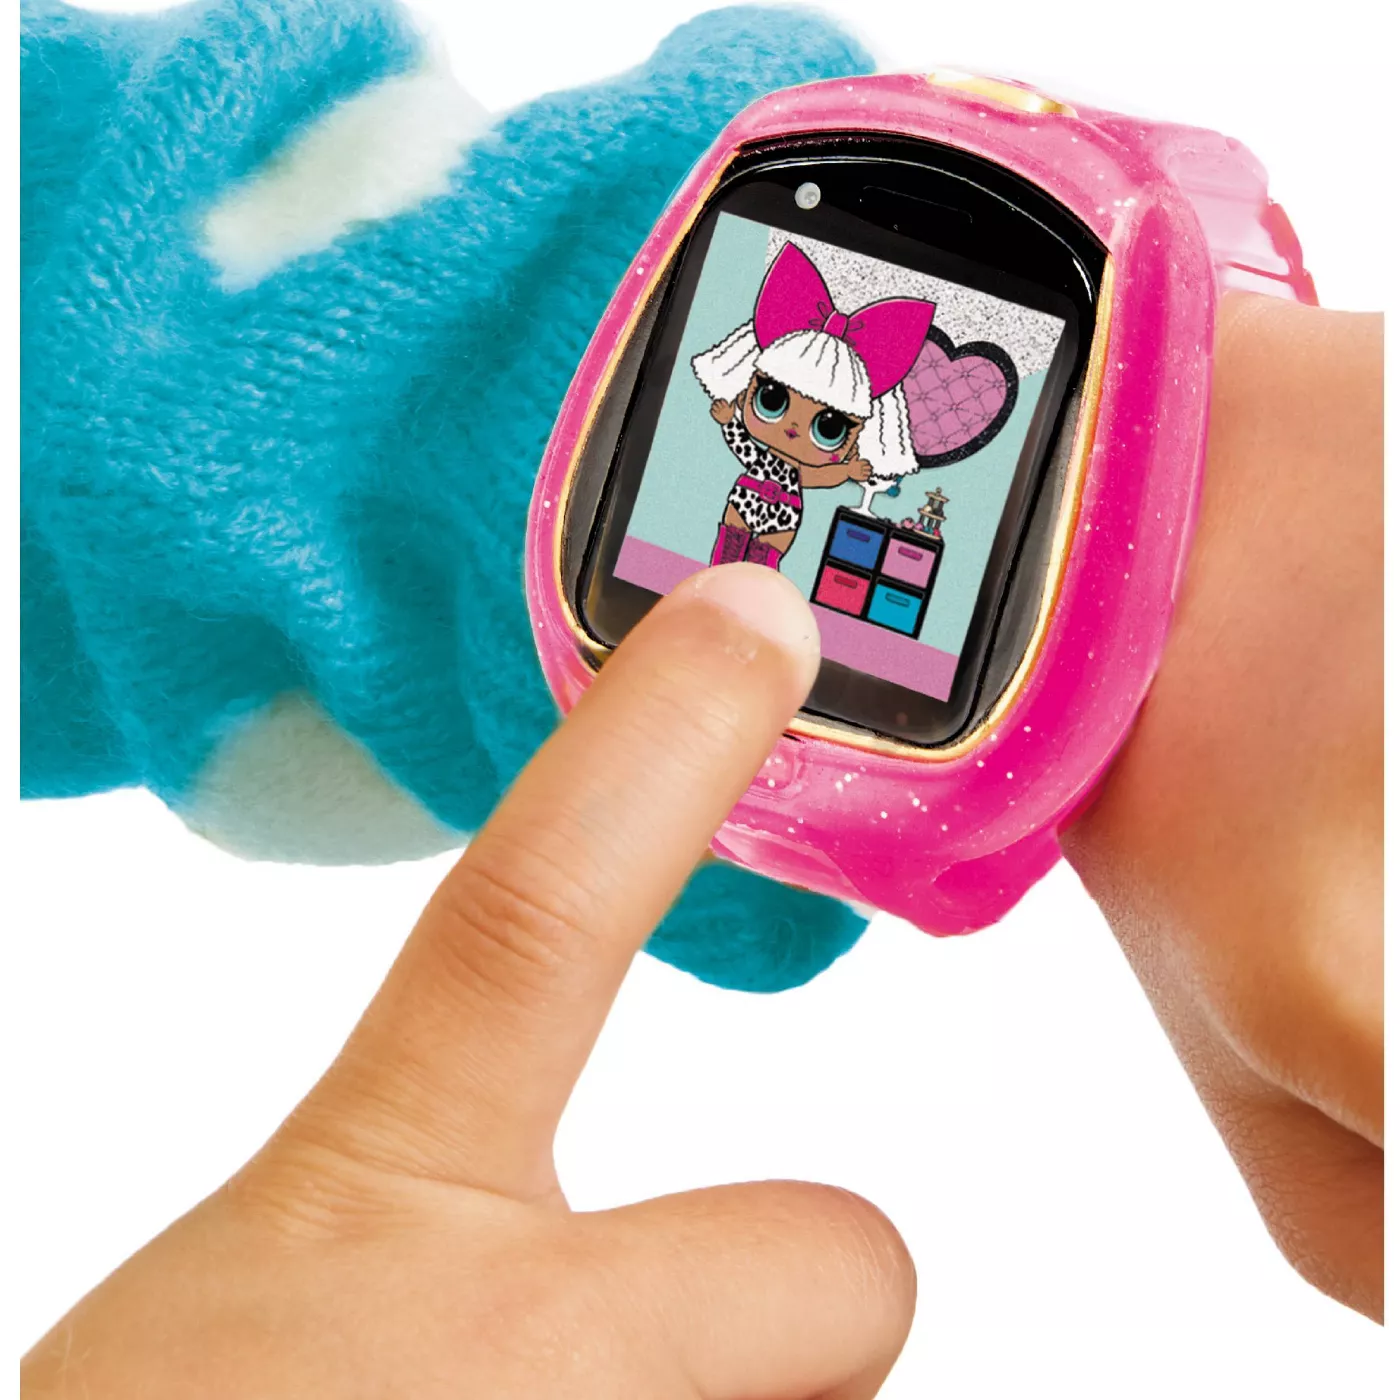 L.O.L. Surprise! Smartwatch! Pink -  Camera, Video, Games, Activities and More - £15.73 GBP